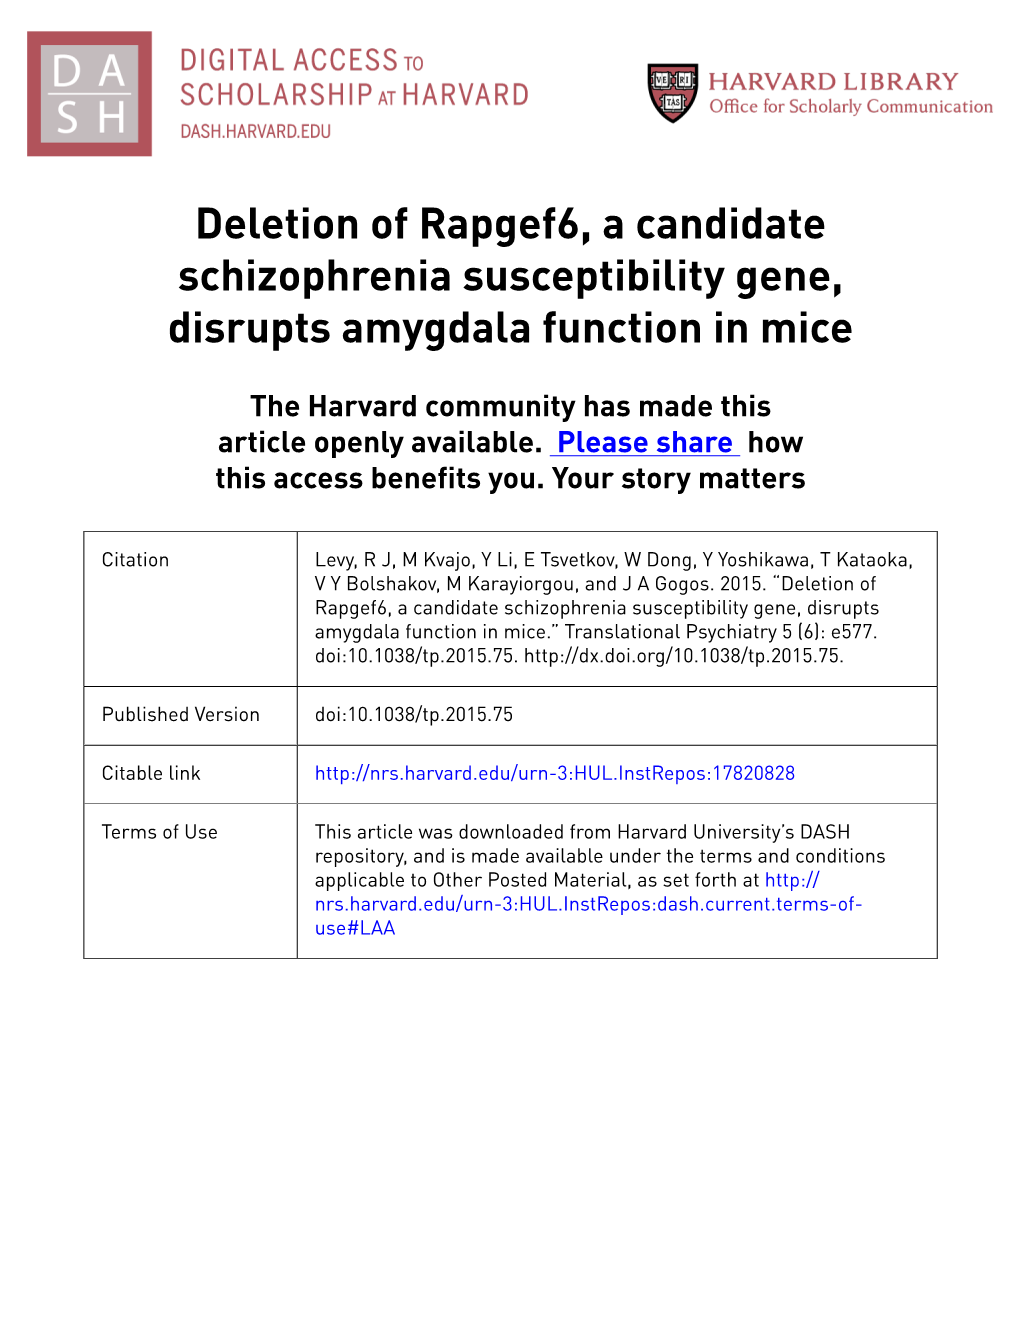 Deletion of Rapgef6, a Candidate Schizophrenia Susceptibility Gene, Disrupts Amygdala Function in Mice